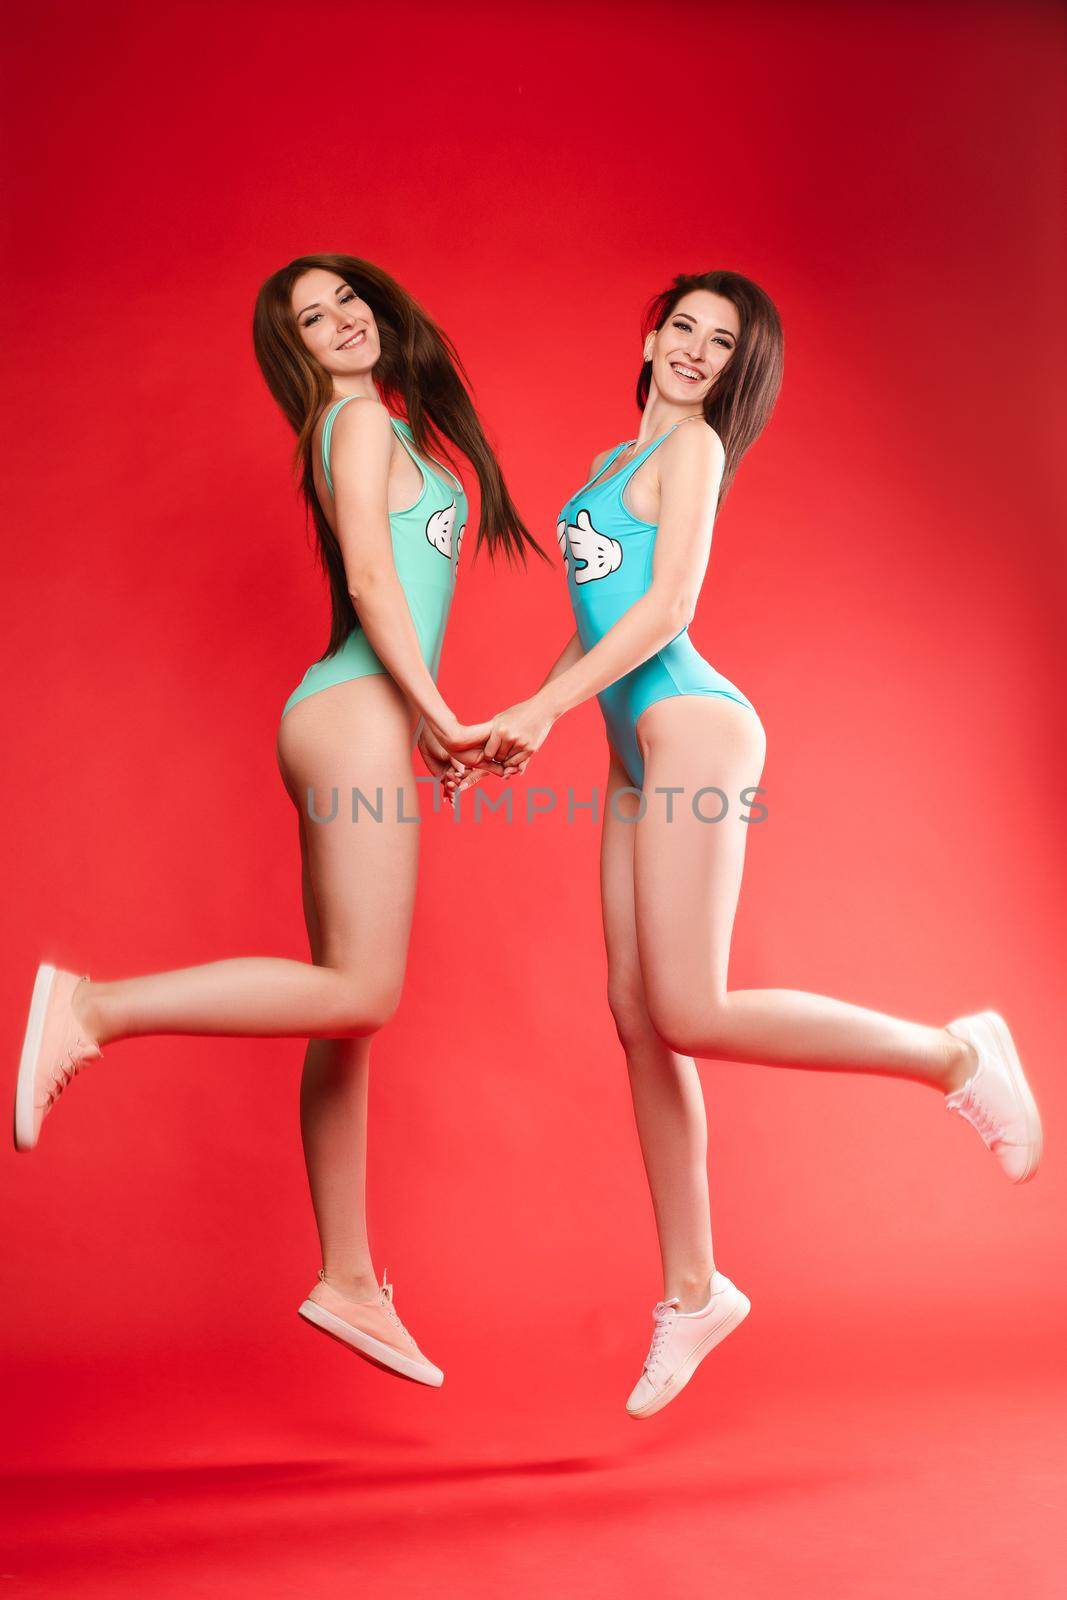 Young models in swimming wear jumping together by StudioLucky